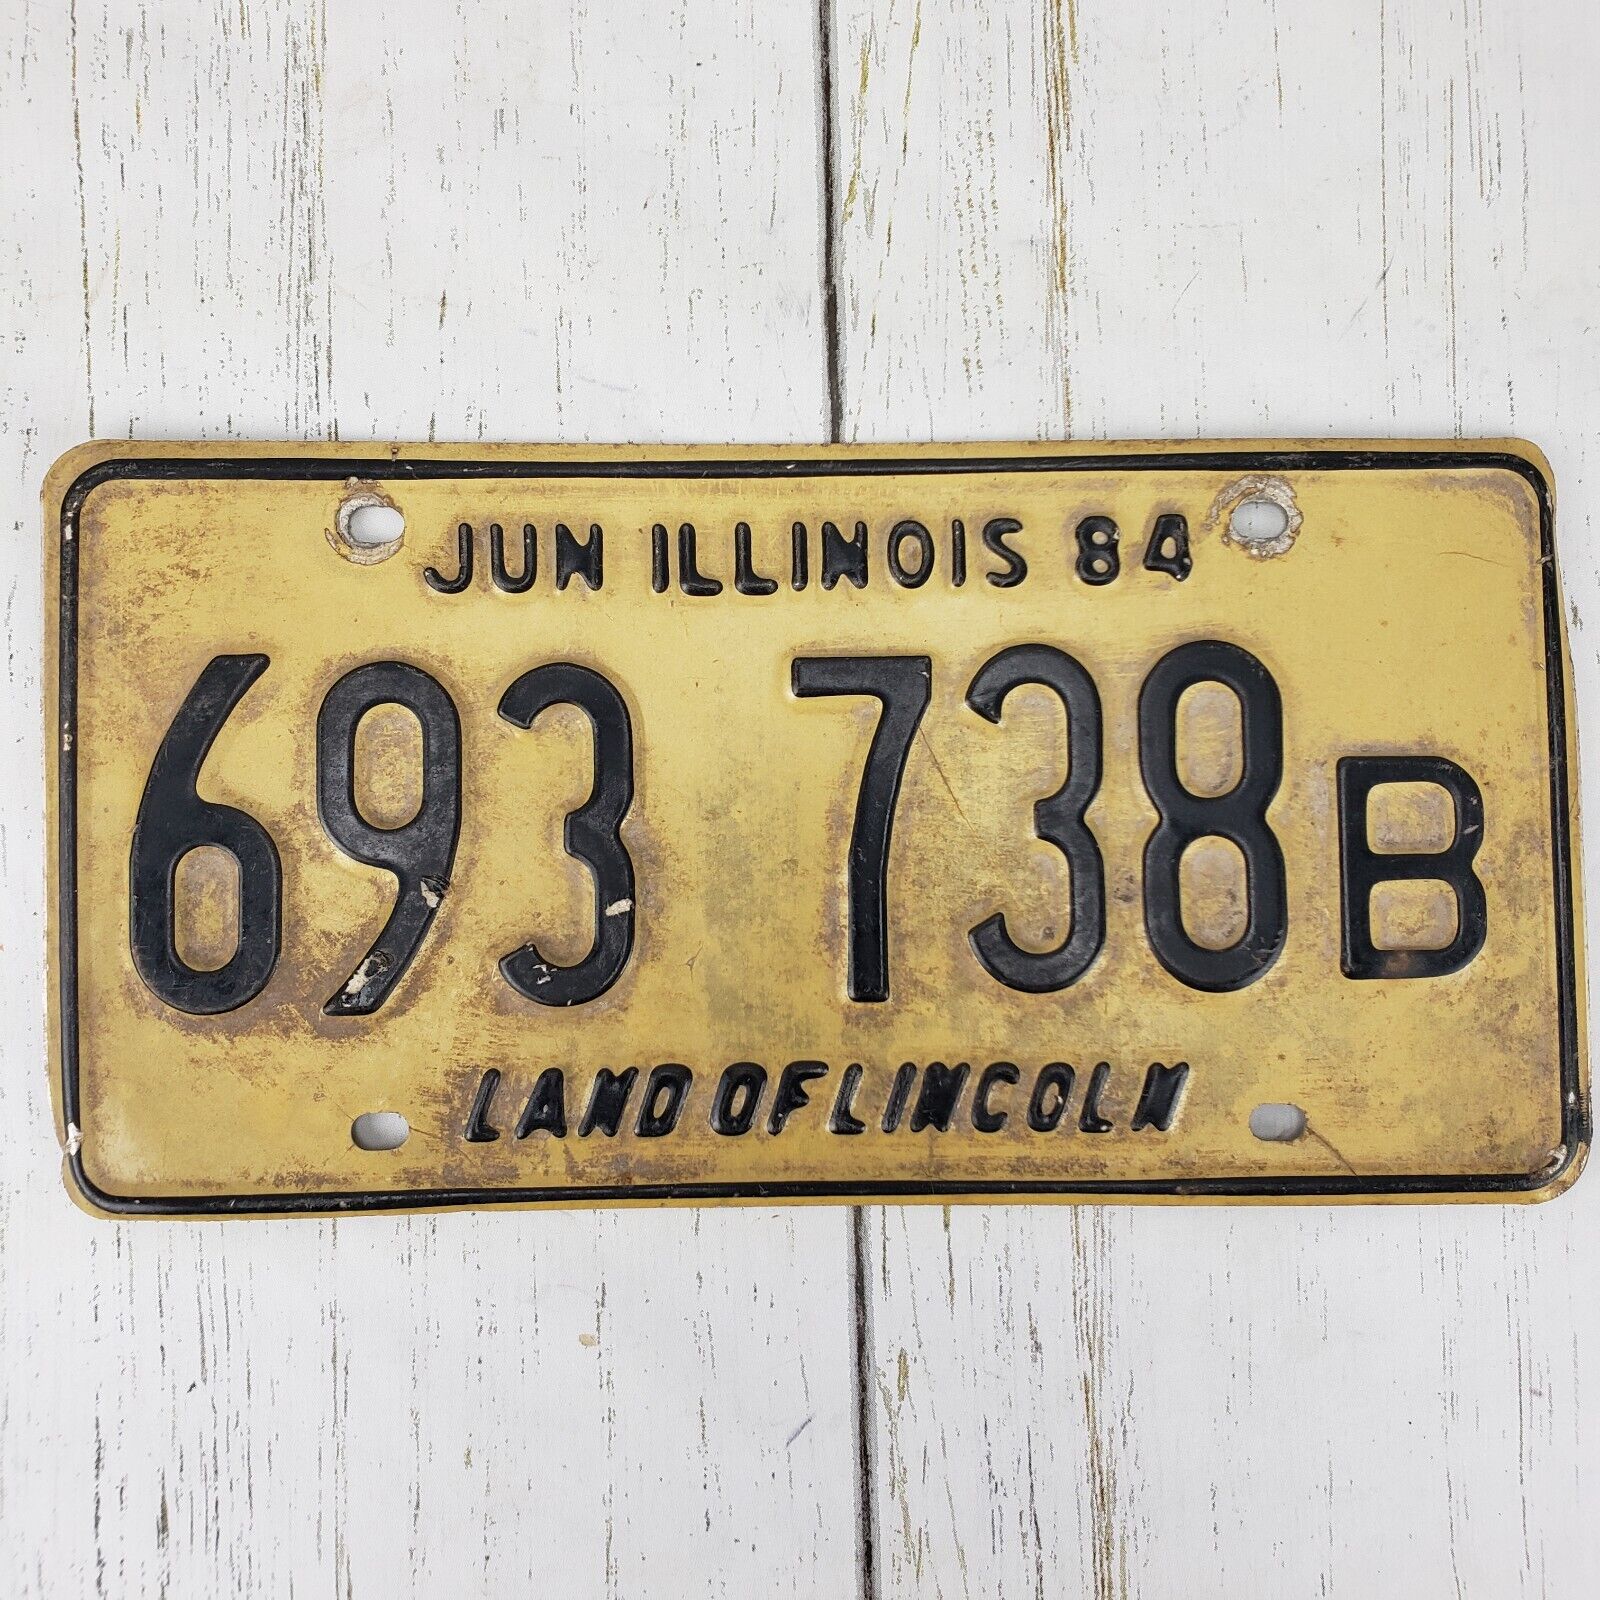 1984 Illinois Land of Lincoln License Plate 693 738 B